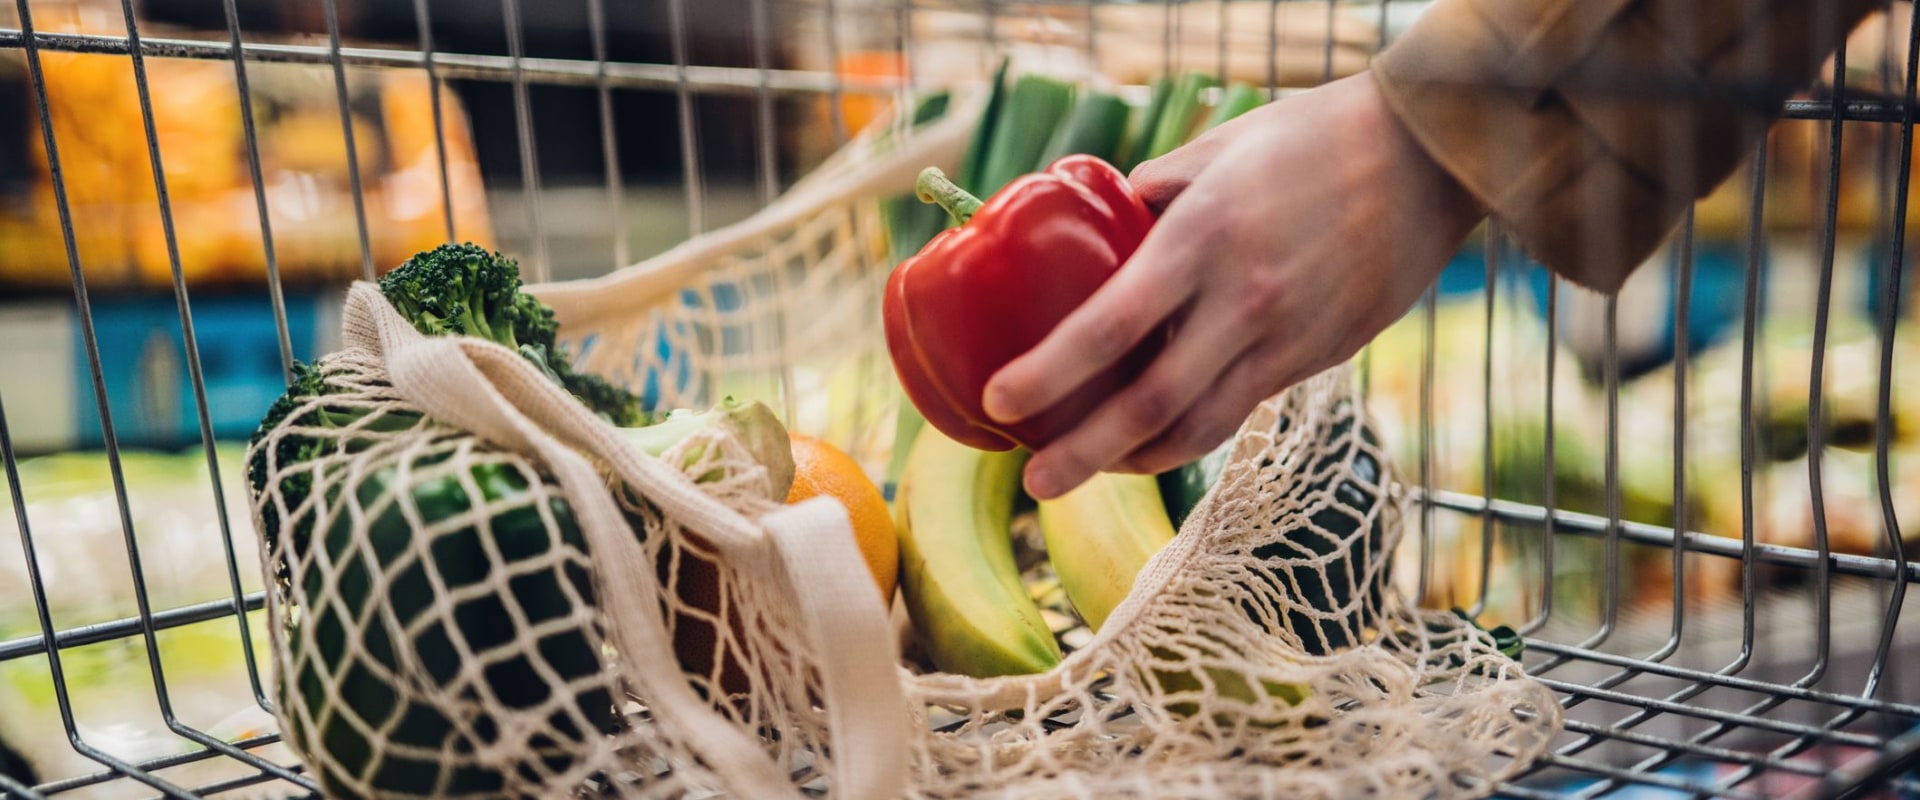 Essential Grocery Shopping List: What to Buy Pre-Made for a Healthy and Efficient Shopping